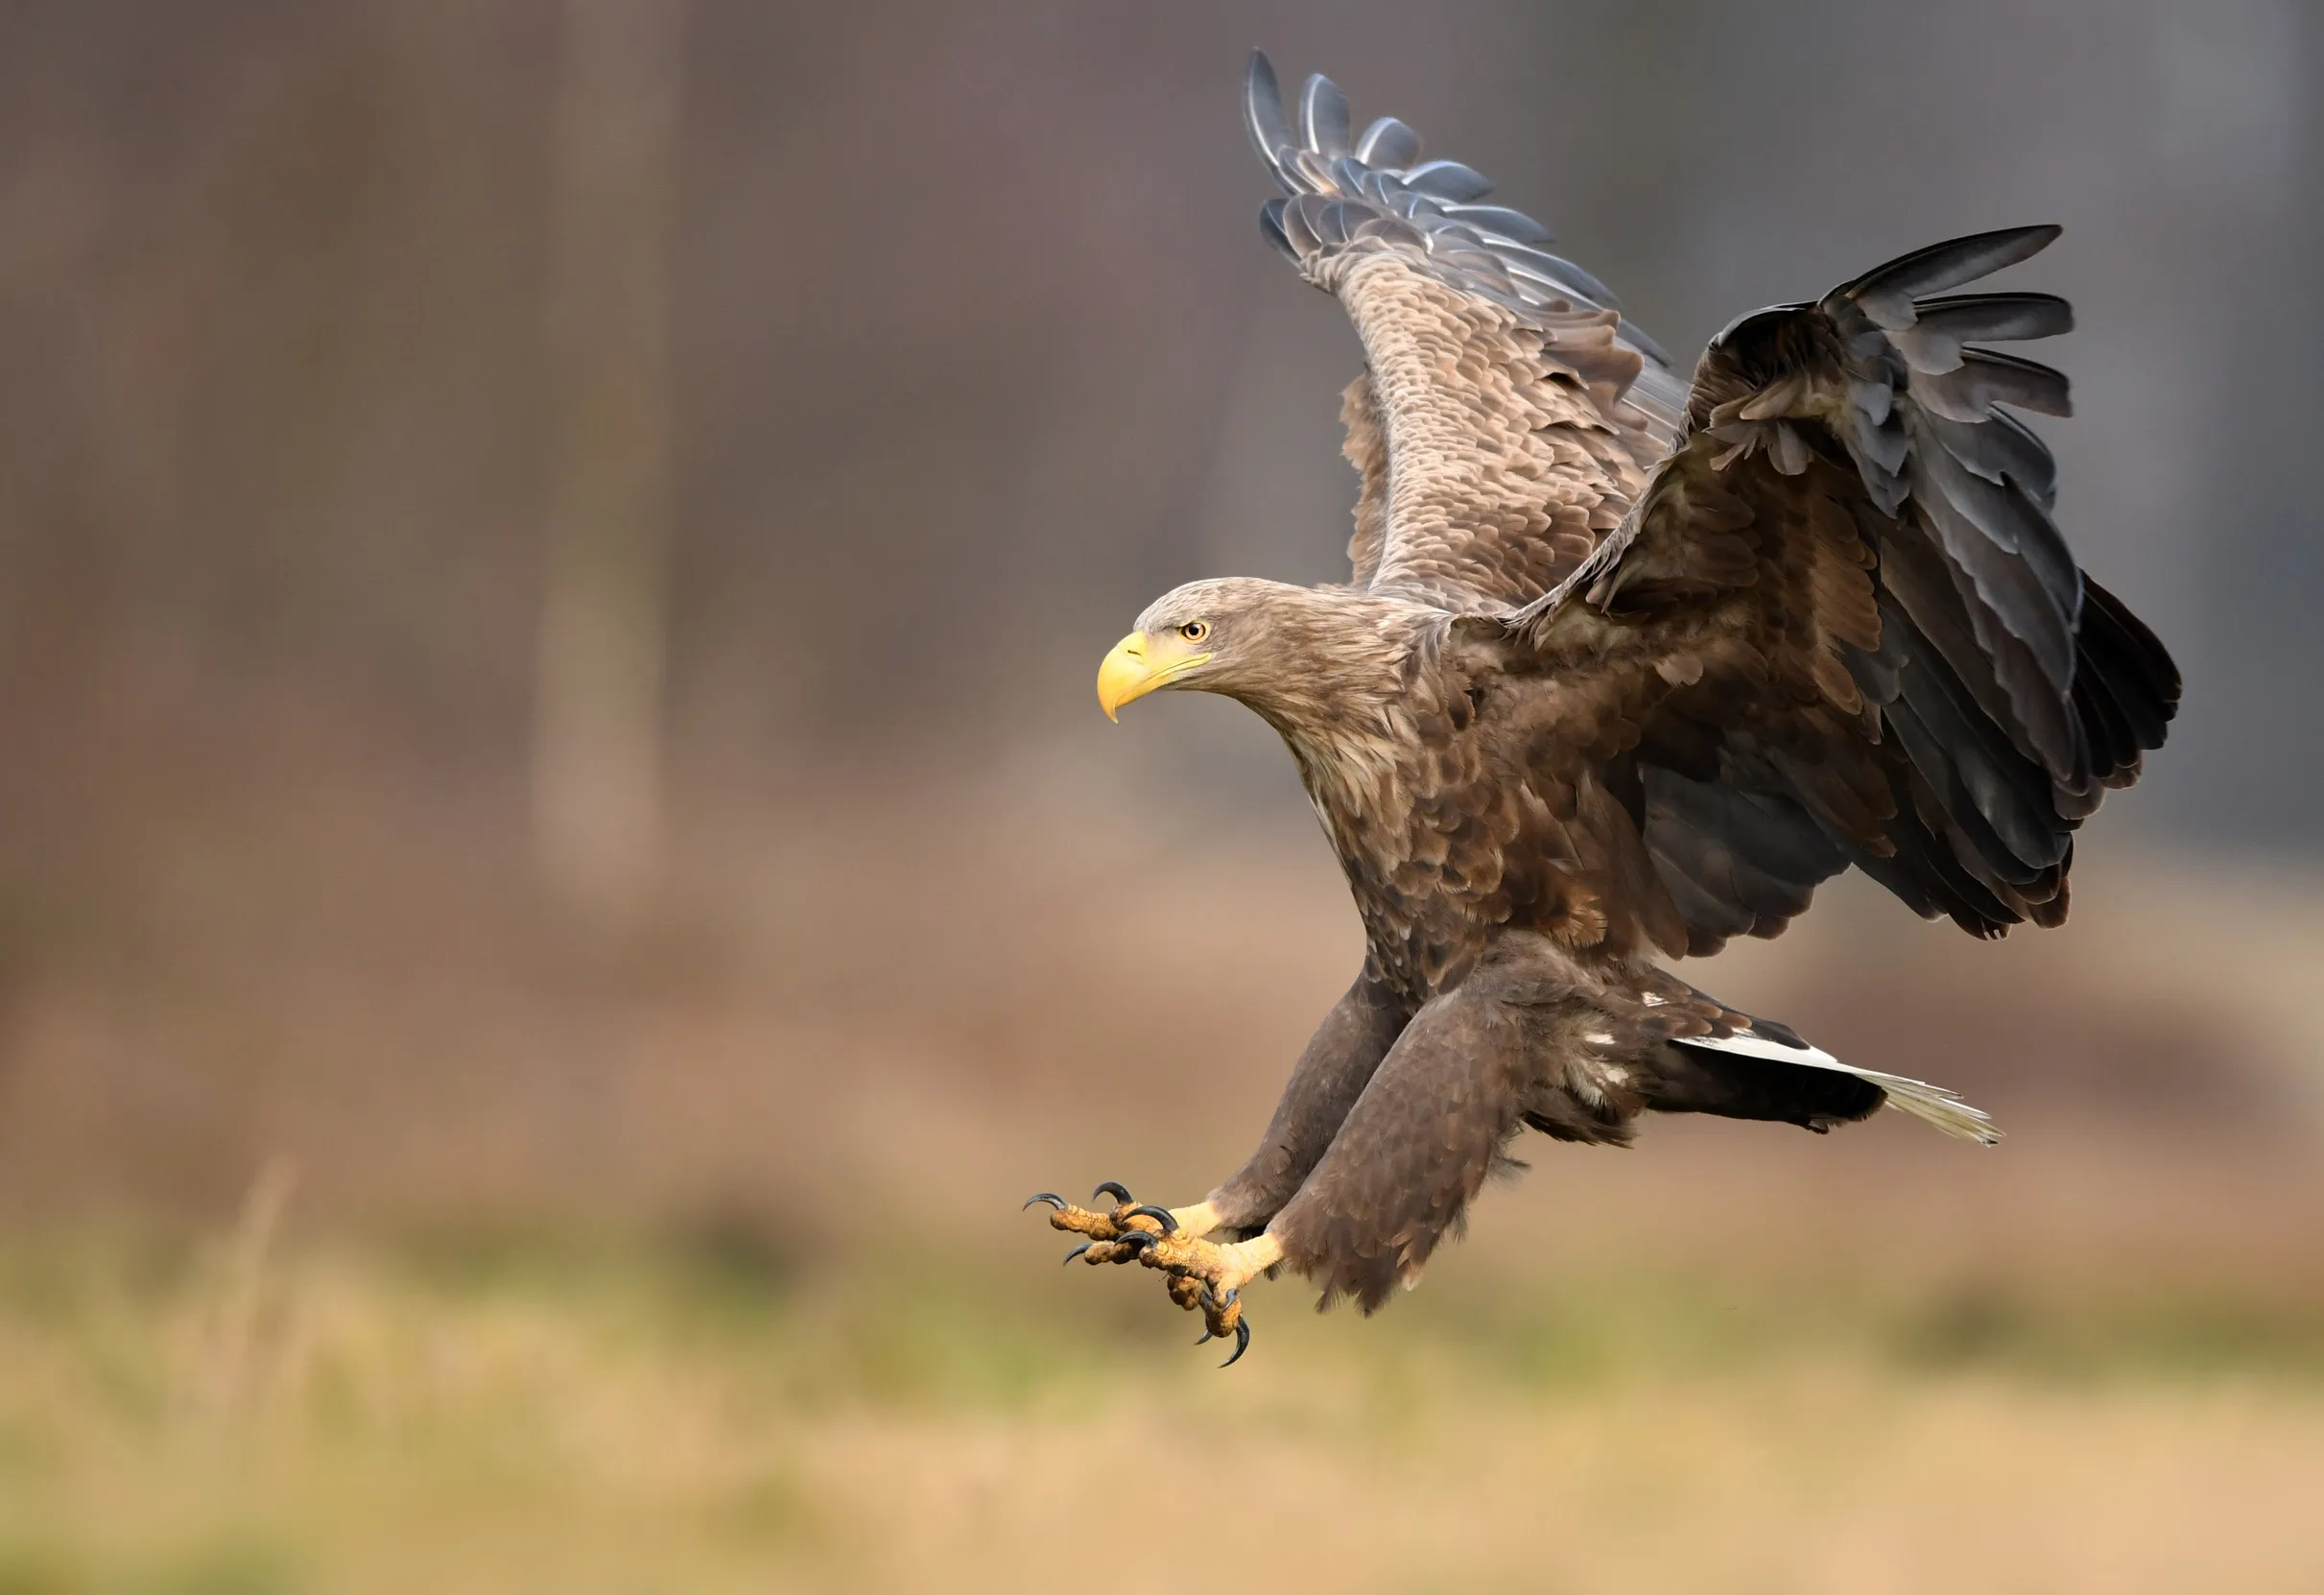 White-tailed Eagle about to land on grassland.